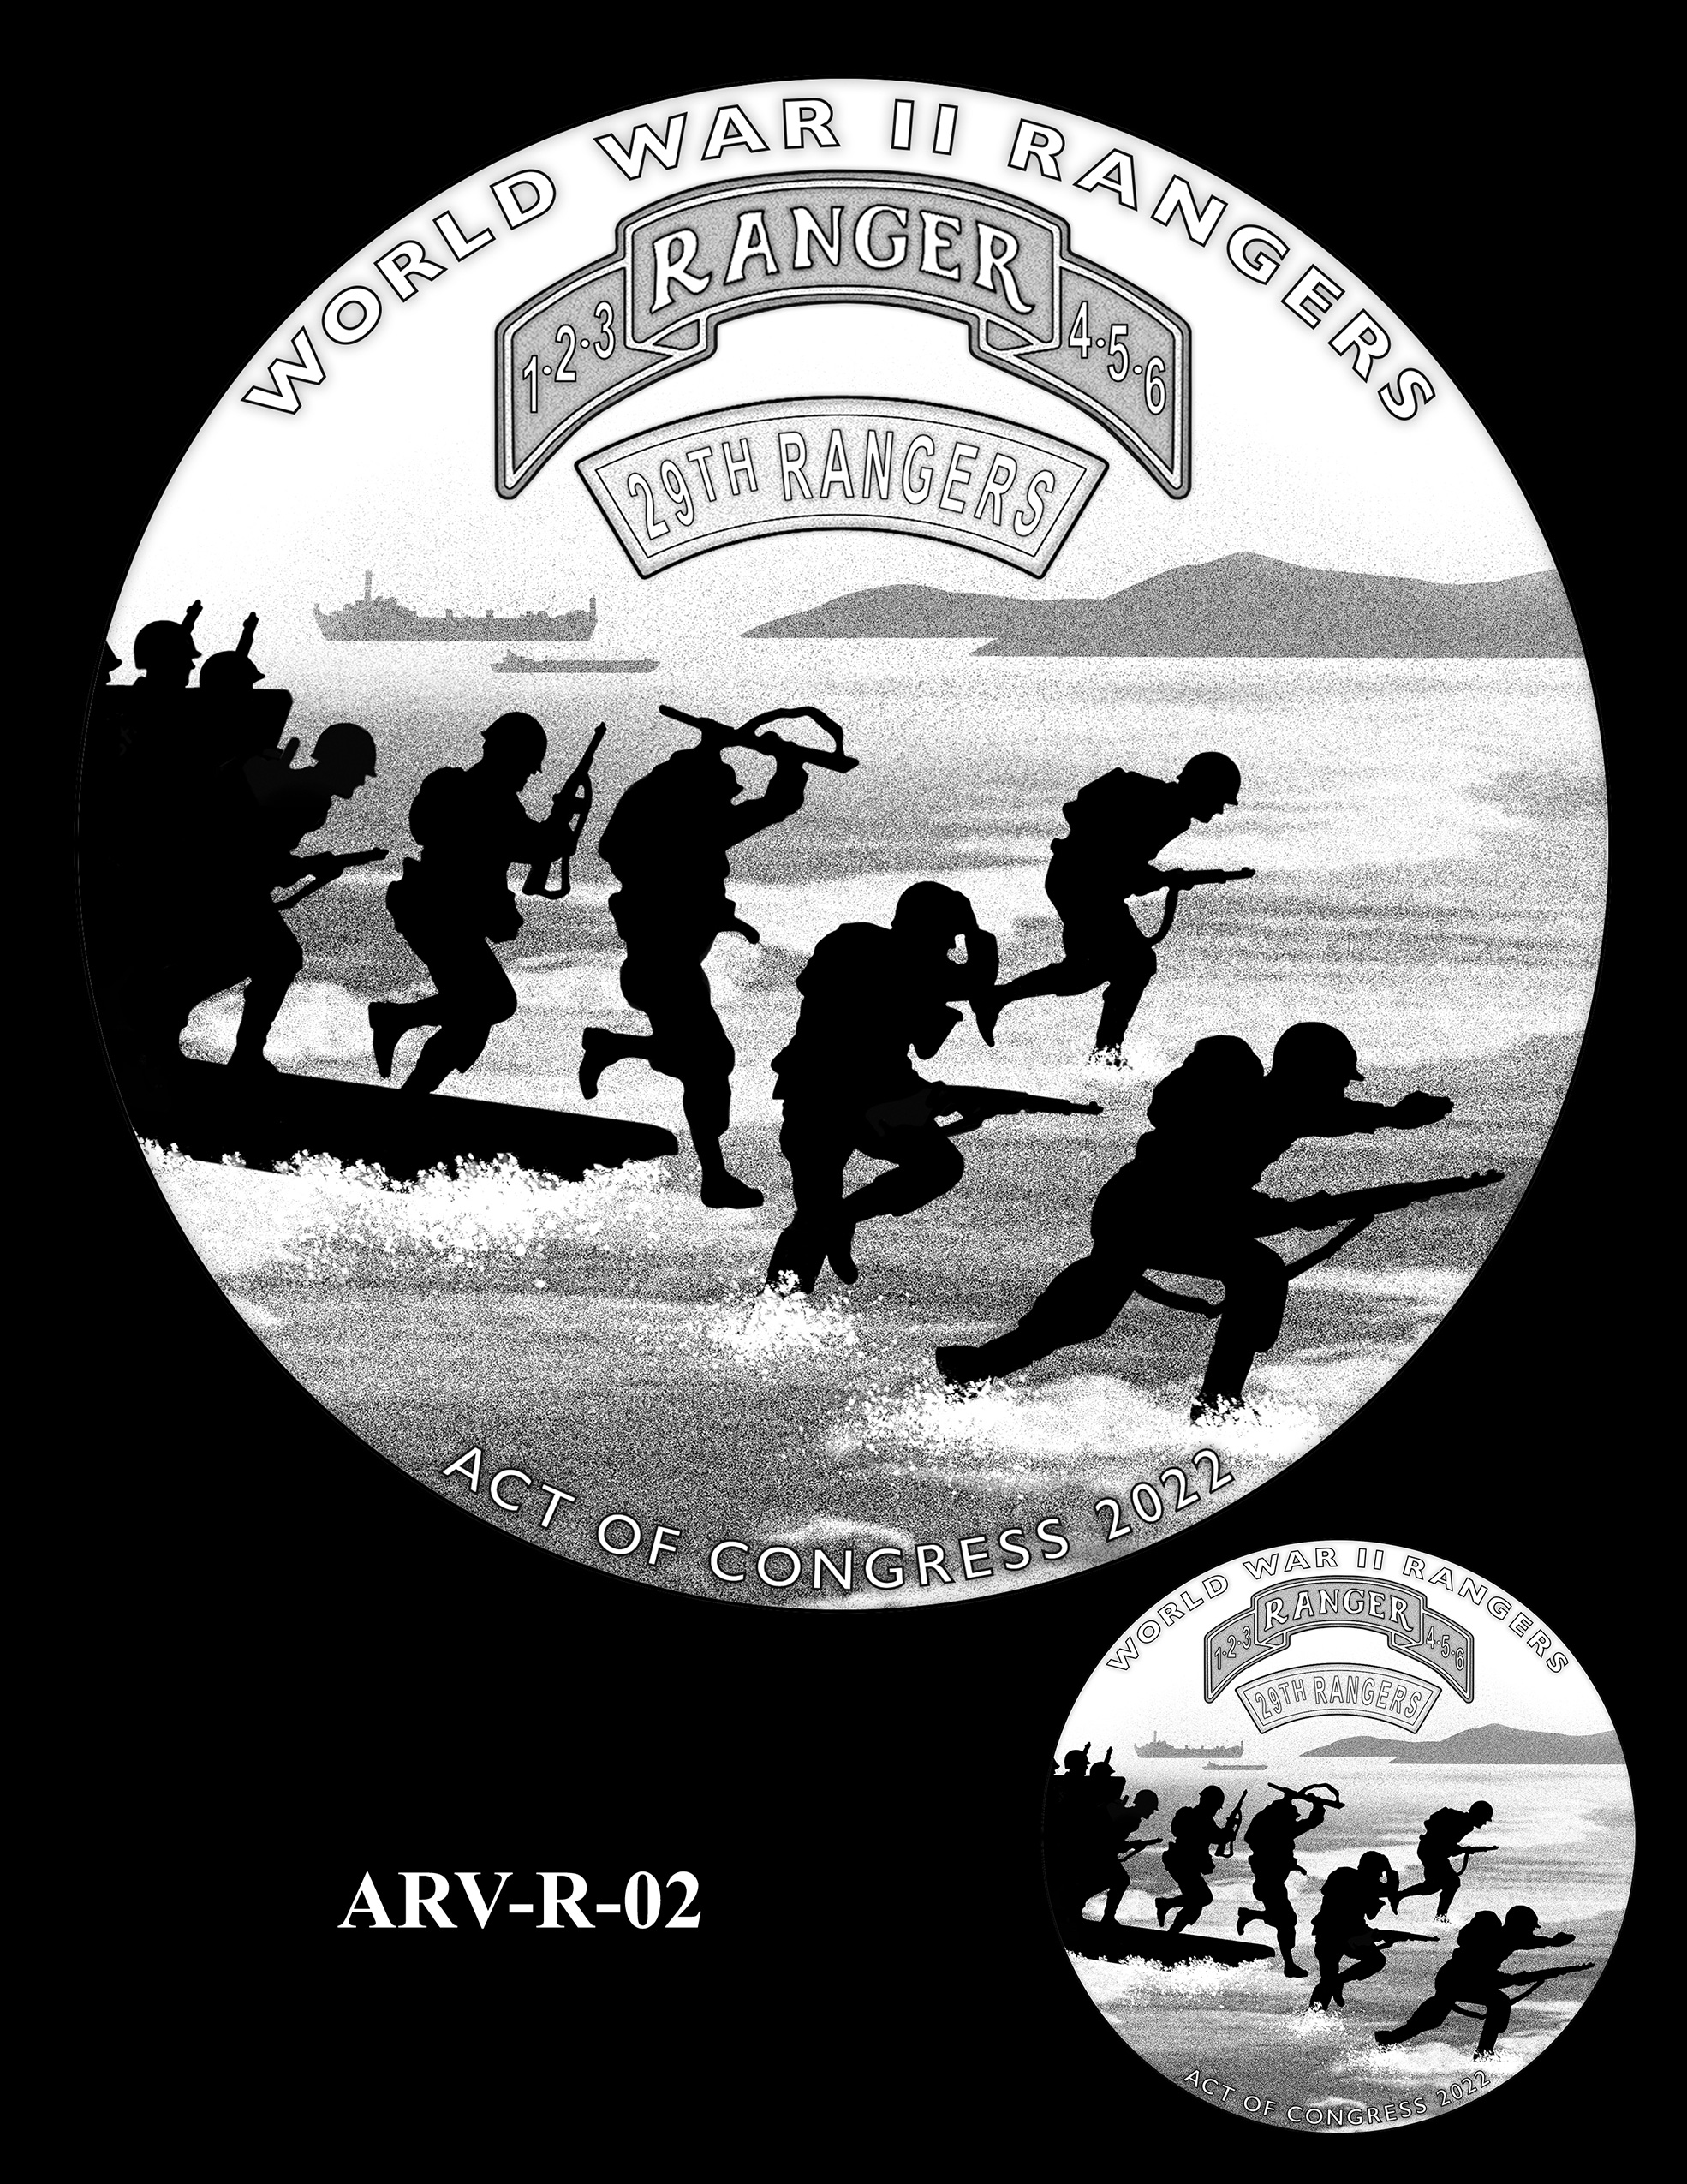 ARV-R-02 -- Army Ranger Veterans of WWII Congressional Gold Medal